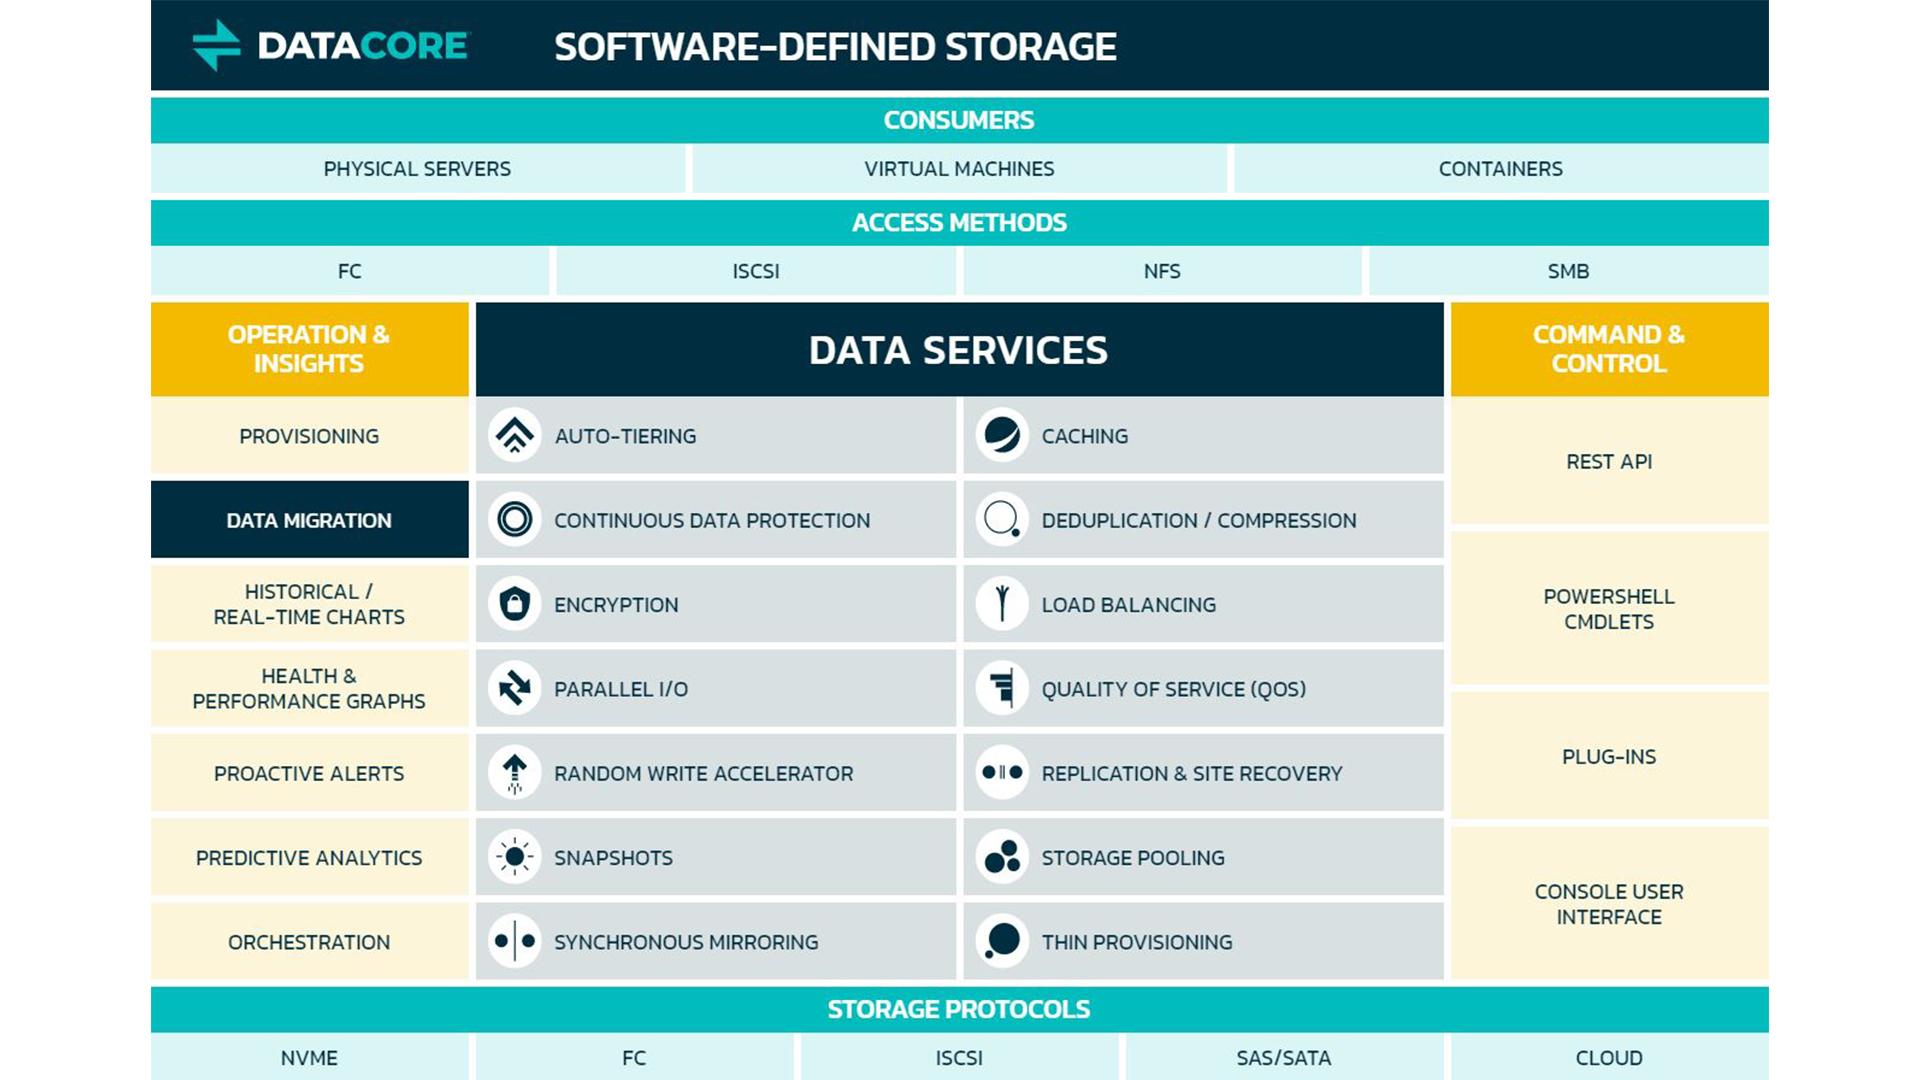 The image shows an overview of Datacore's features.